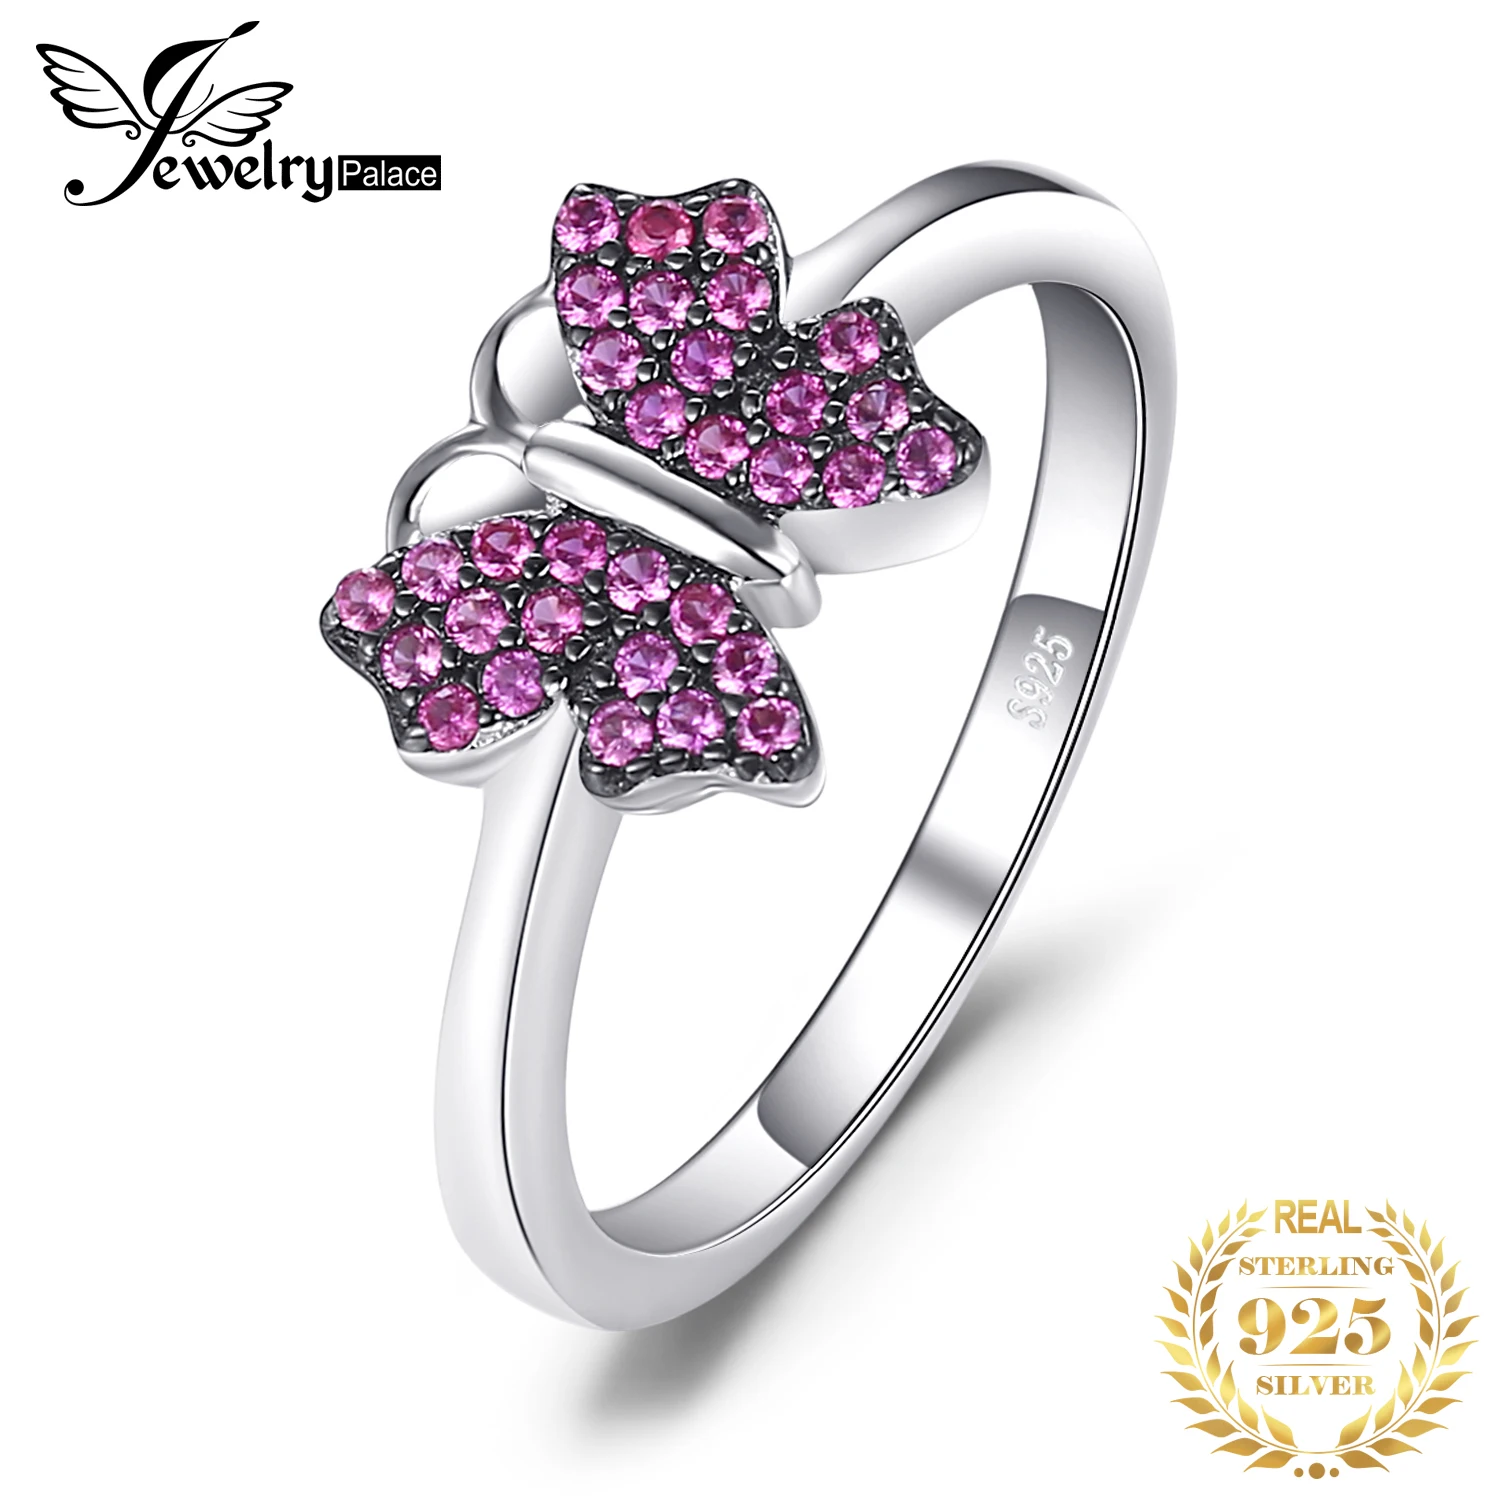 

JewelryPalace Butterfly Red Created Ruby 925 Sterling Silver Rings for Women Fashion Pink Statement Ring Gemstone Jewelry